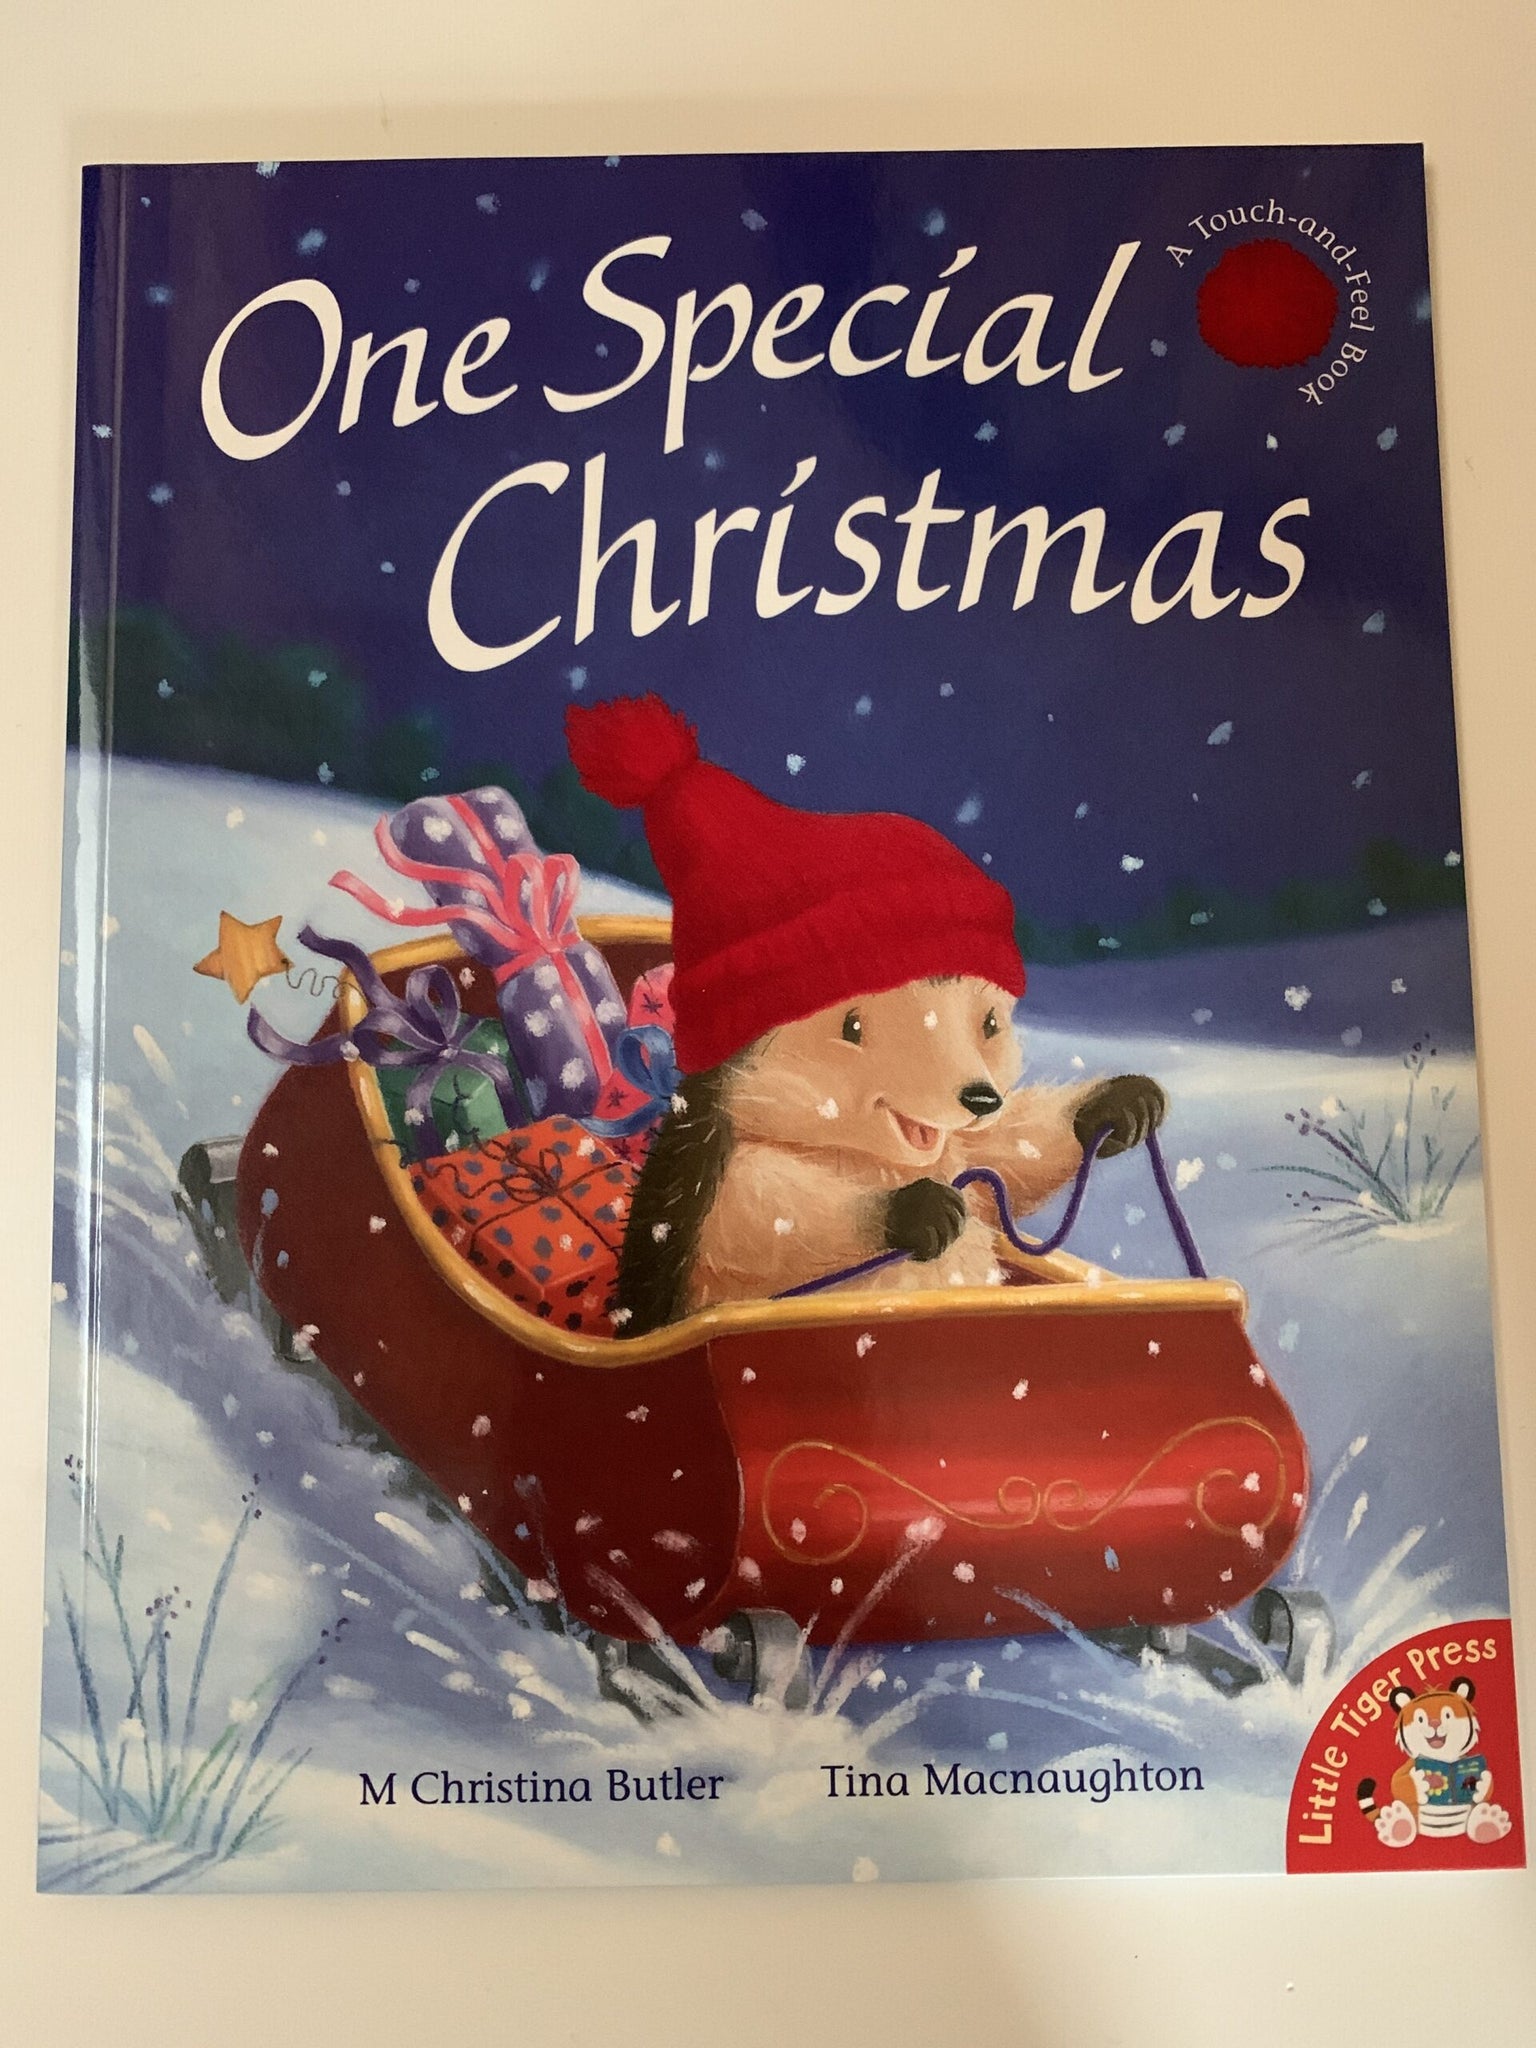 One Special Christmas